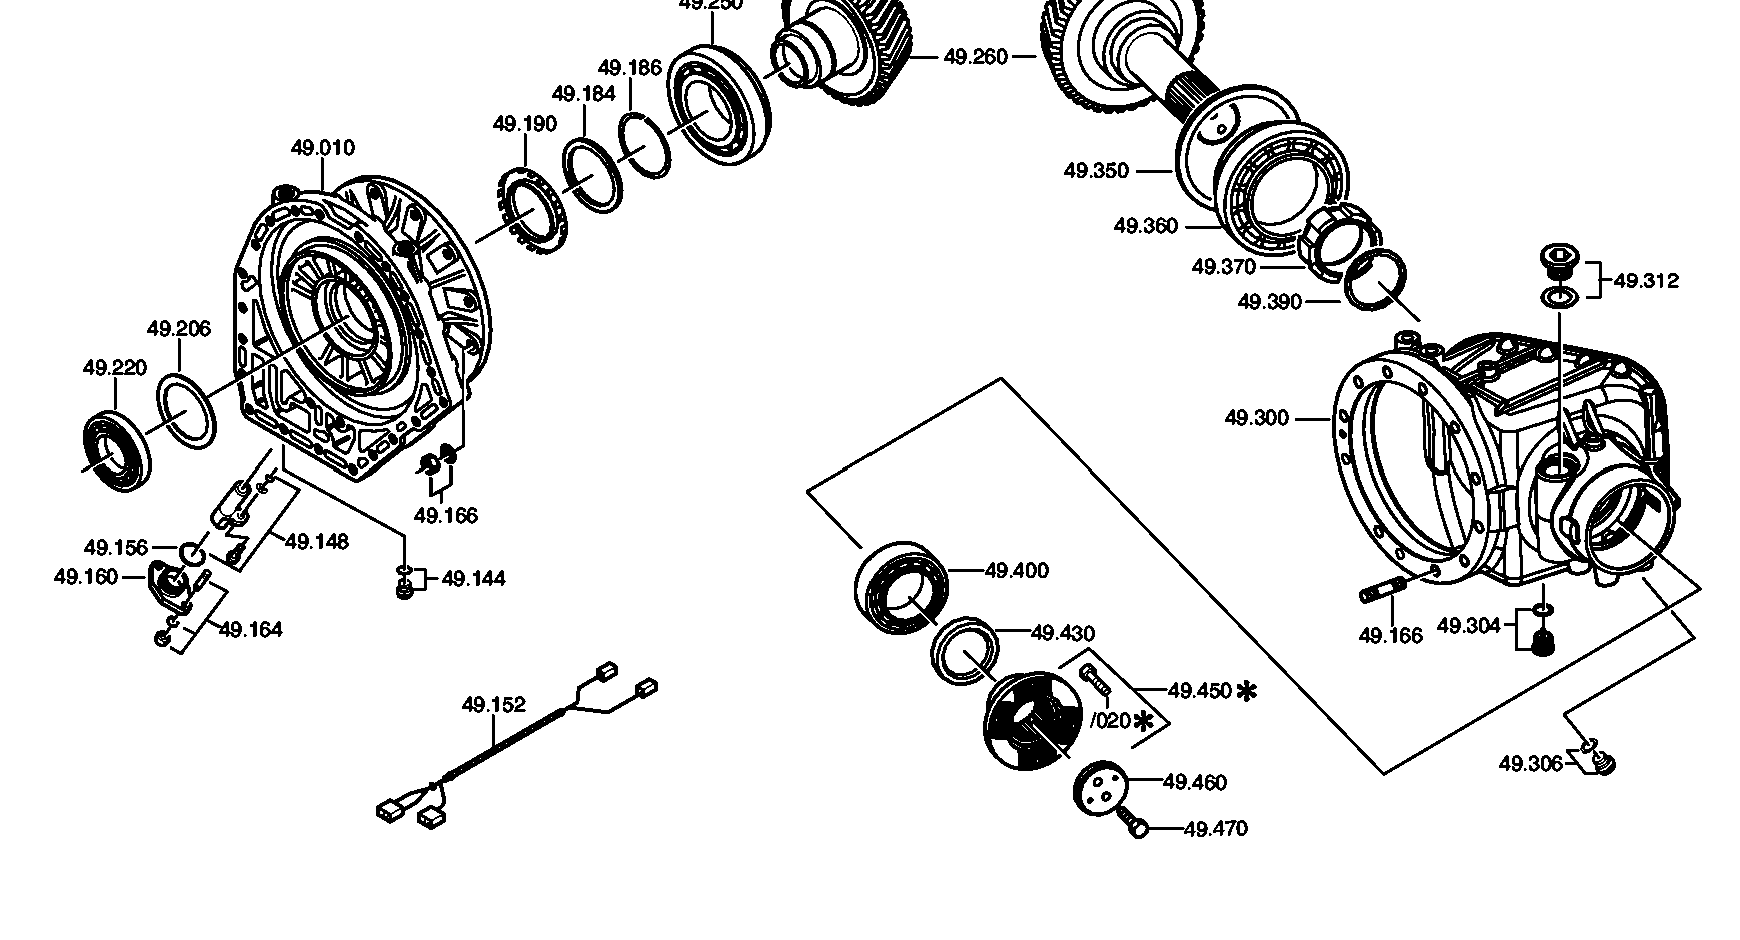 drawing for VOITH-GETRIEBE KG 01.0917.82 - TAPERED ROLLER BEARING (figure 3)